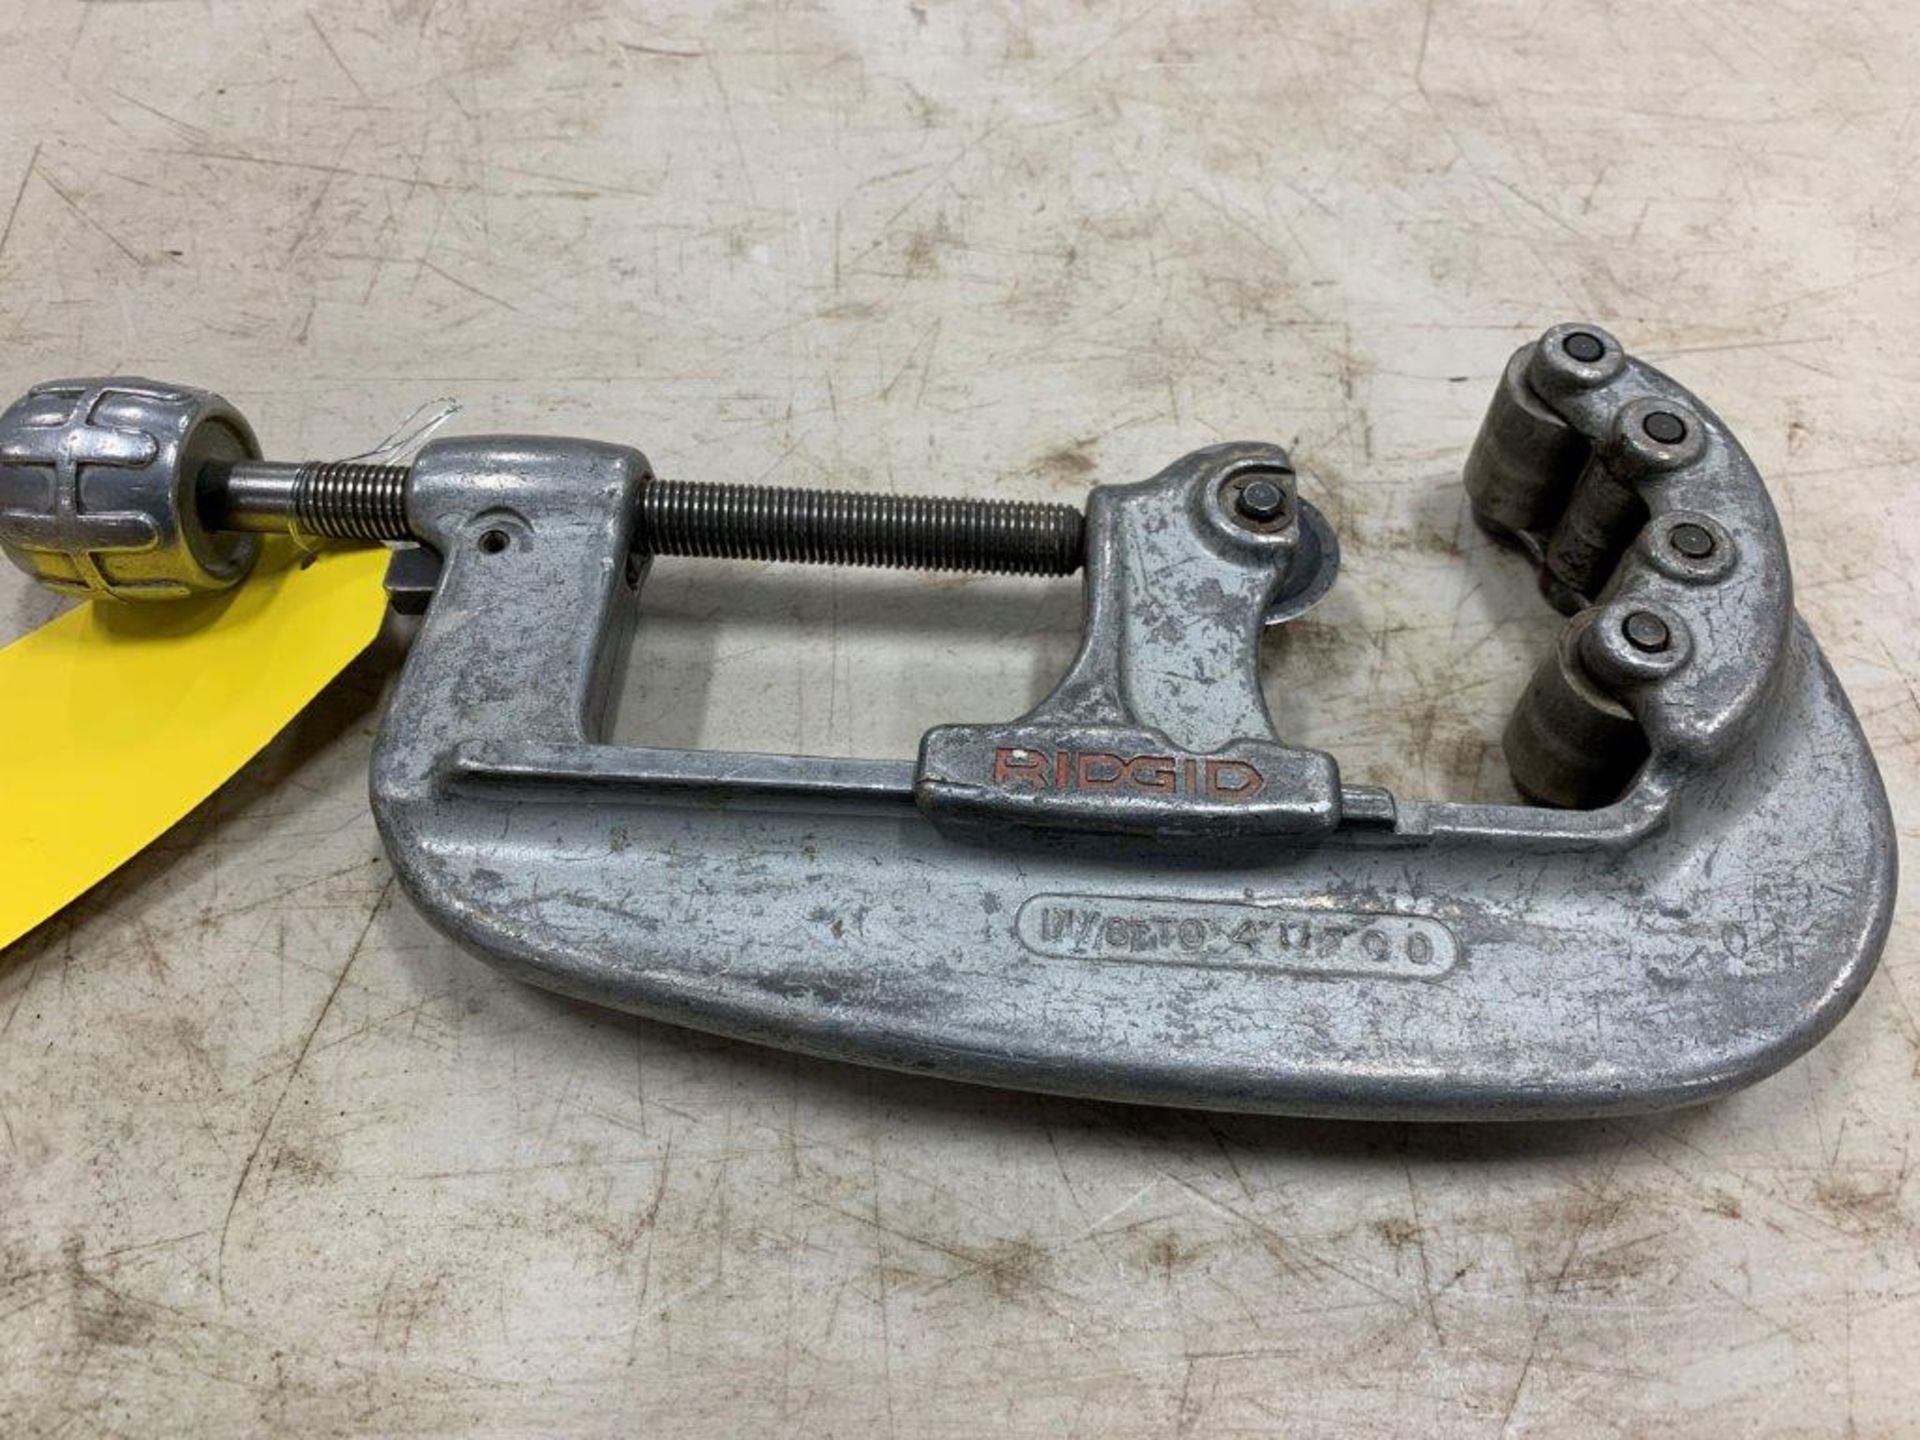 RIDGID NO.134 PIPE CUTTER, 1-1/8" TO 4-1/2" OD - Image 2 of 2